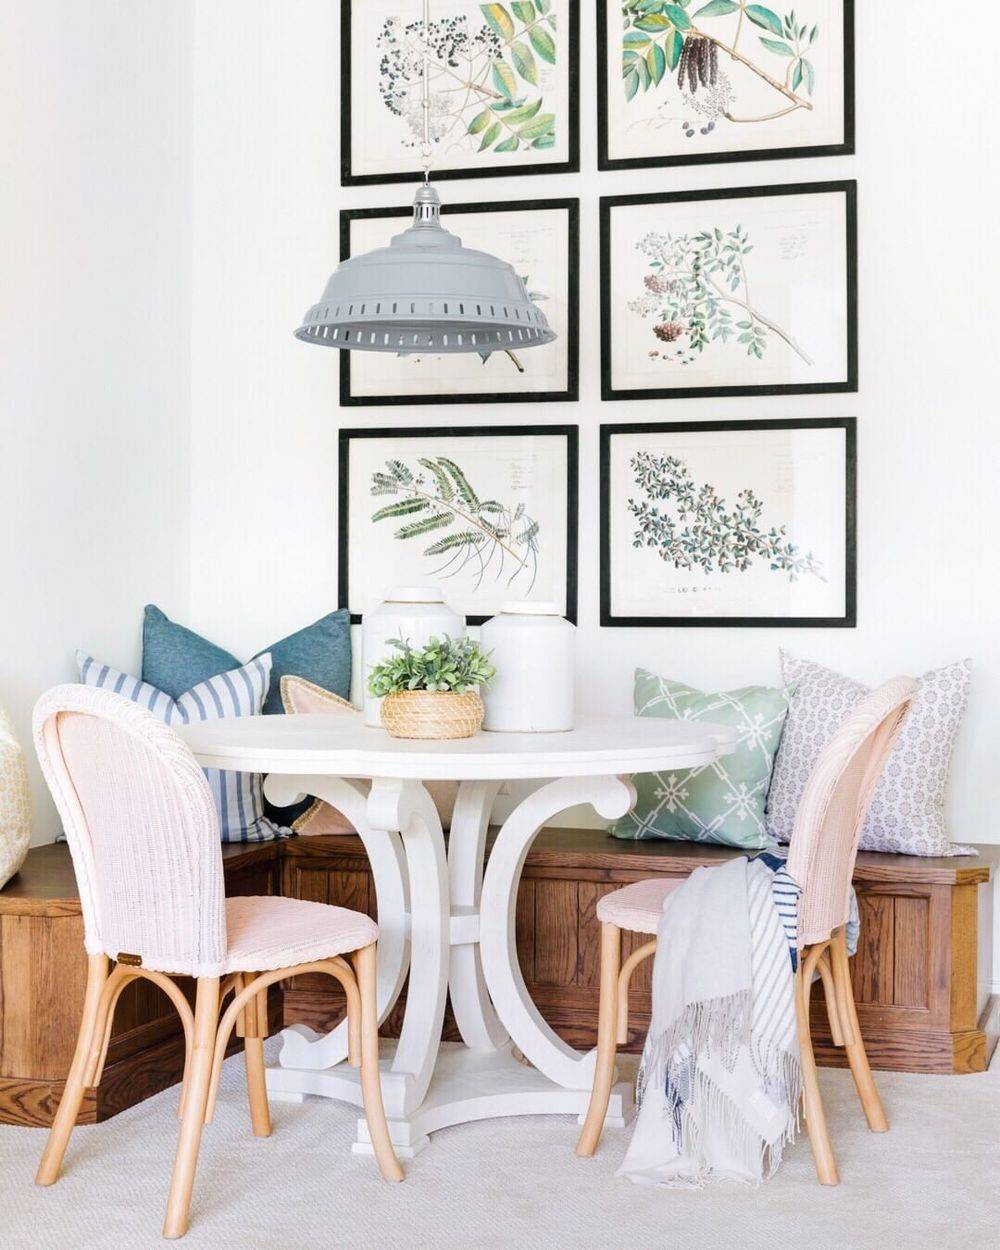 Cozy Breakfast Nooks That Make You Never Want To Eat Out For Brunch Again